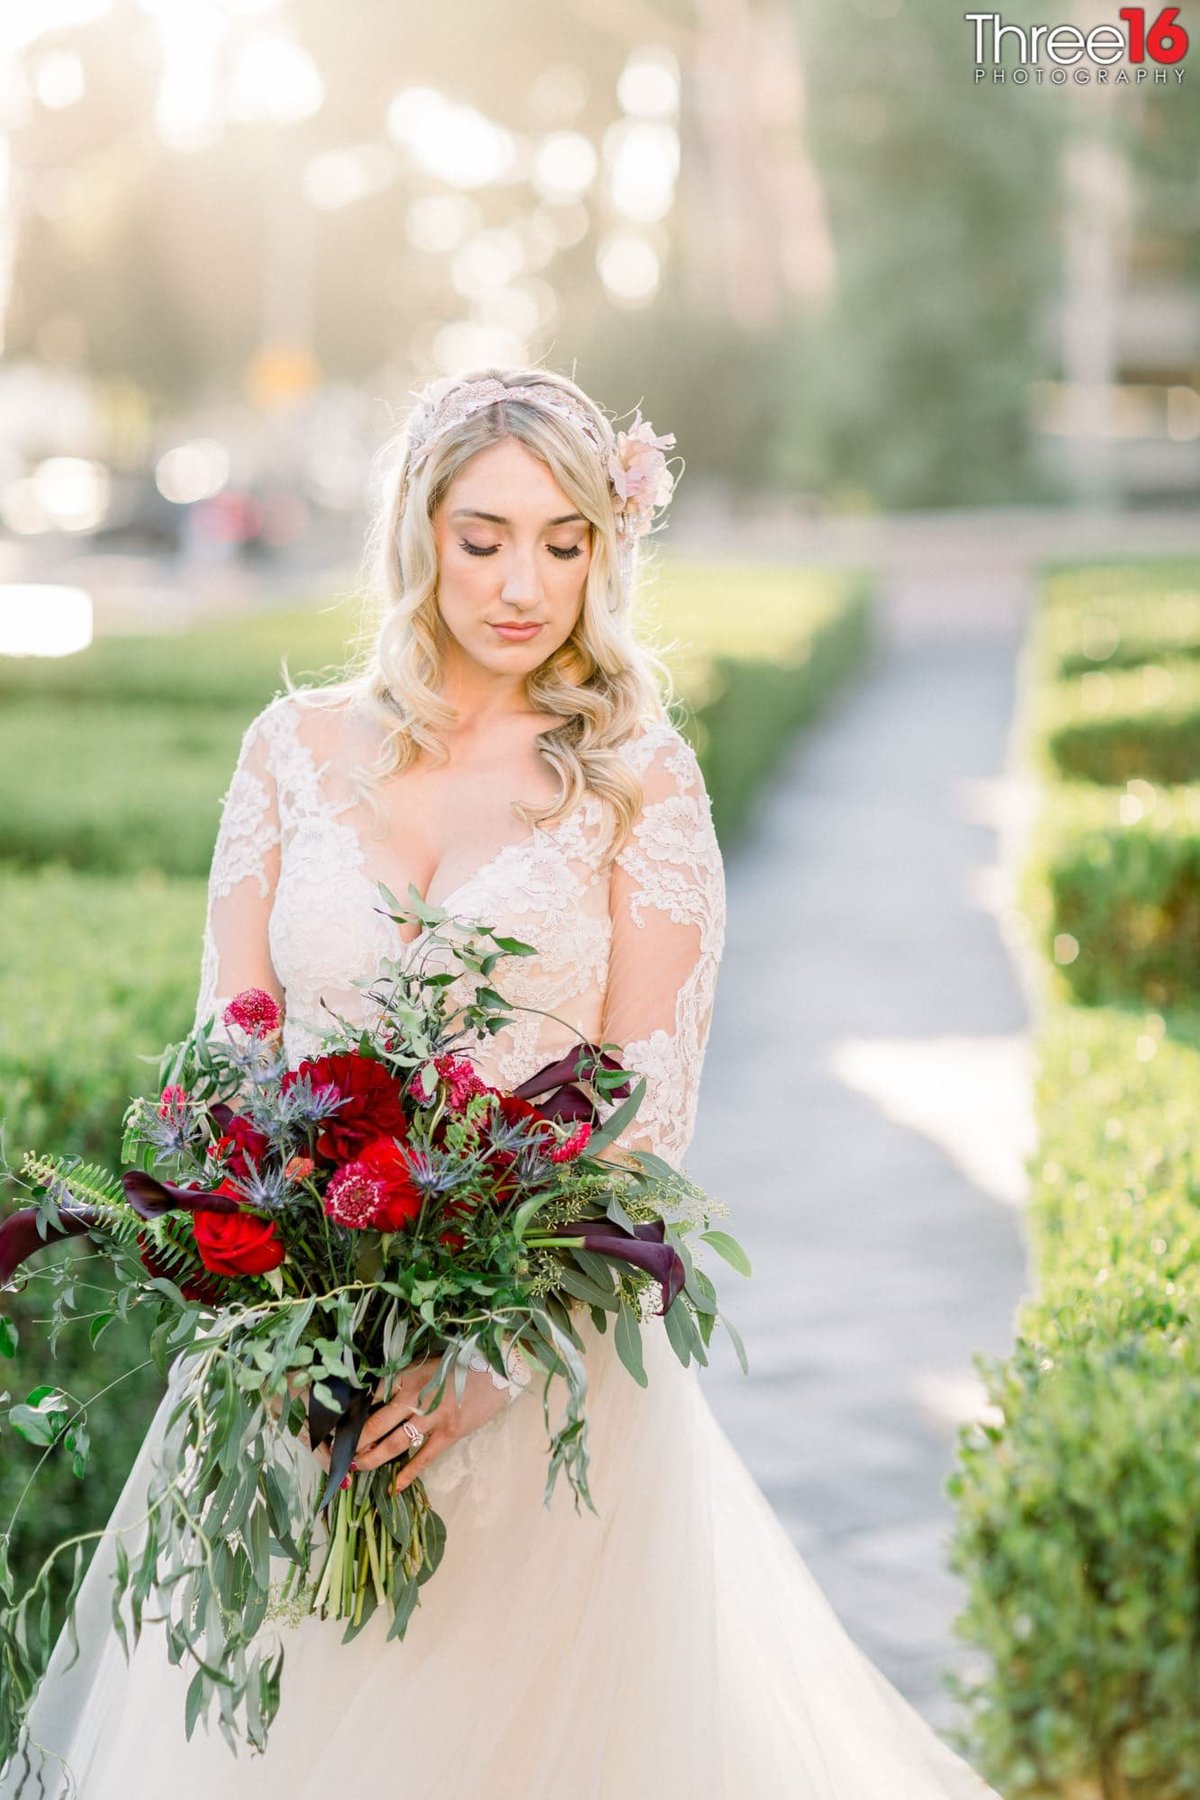 Beautiful Bride and her Bouquet of Flowers